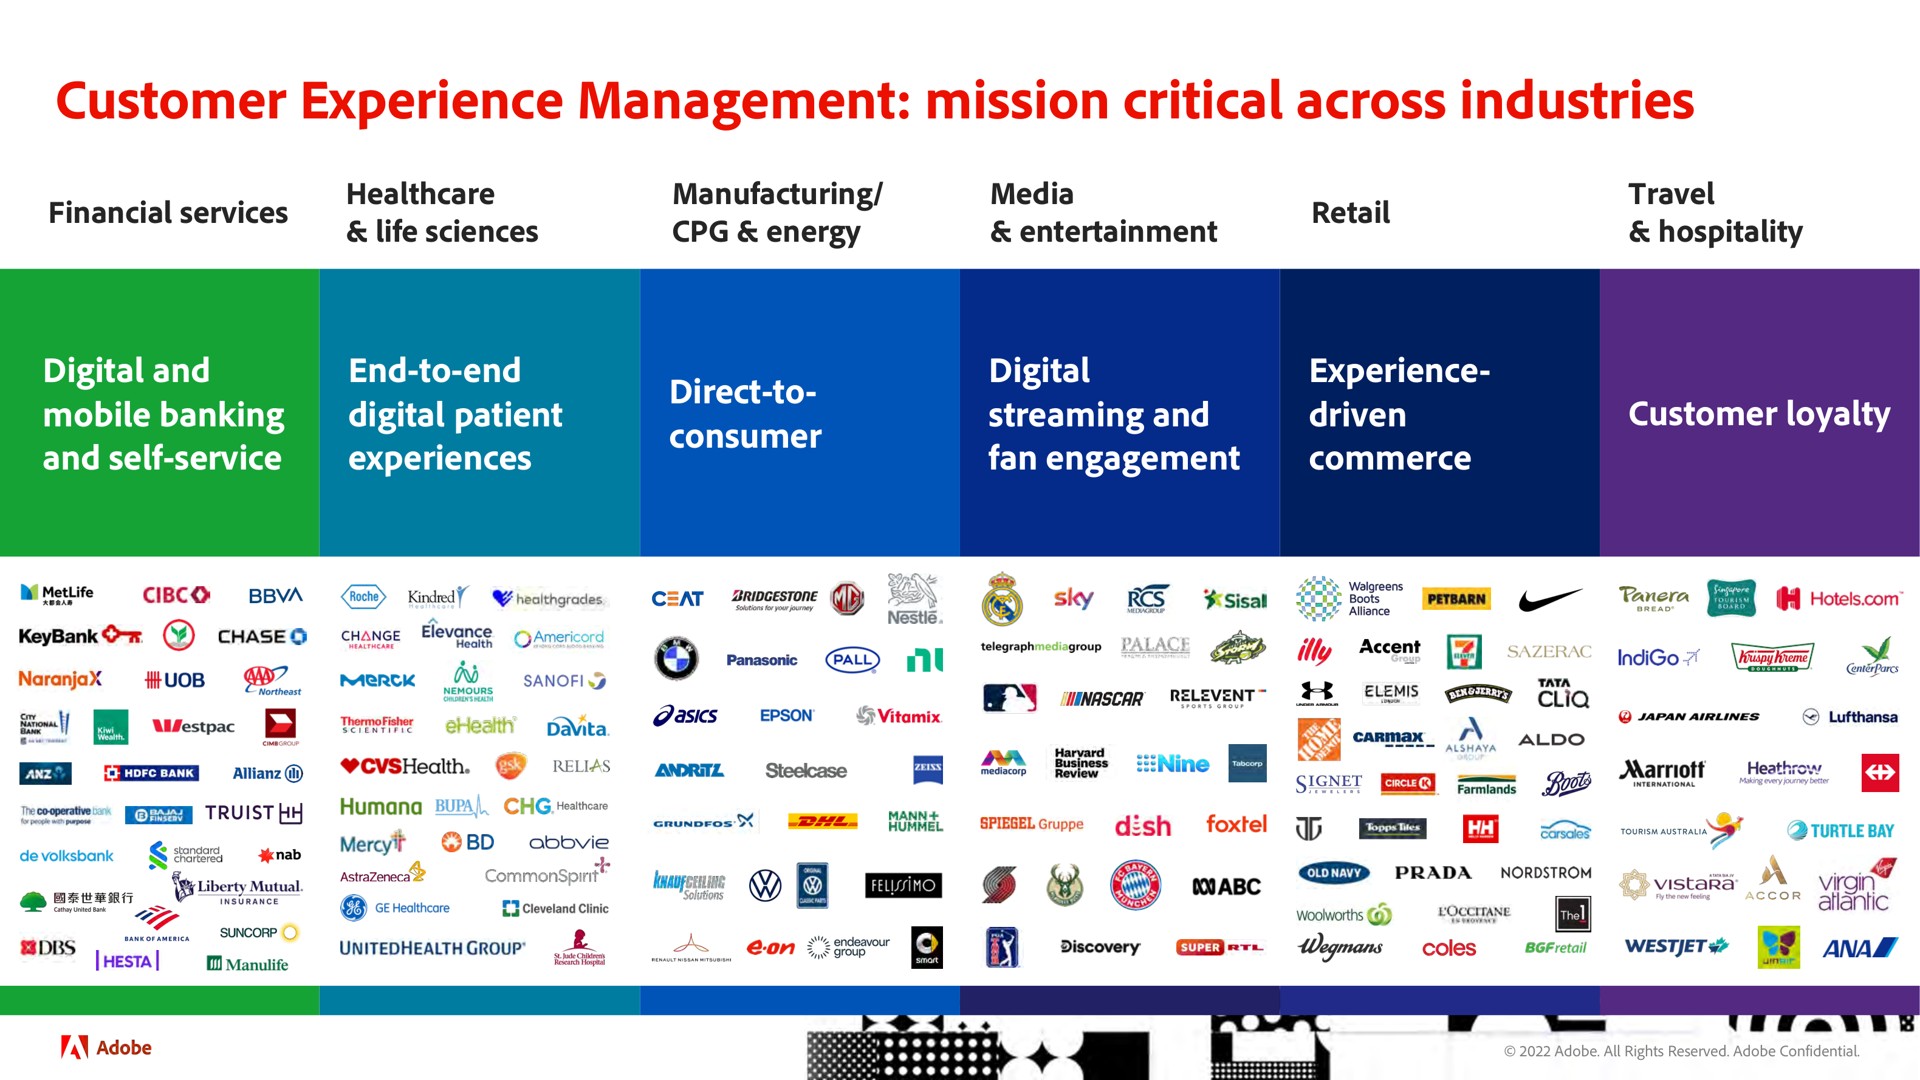 customer experience management mission critical across industries | Adobe